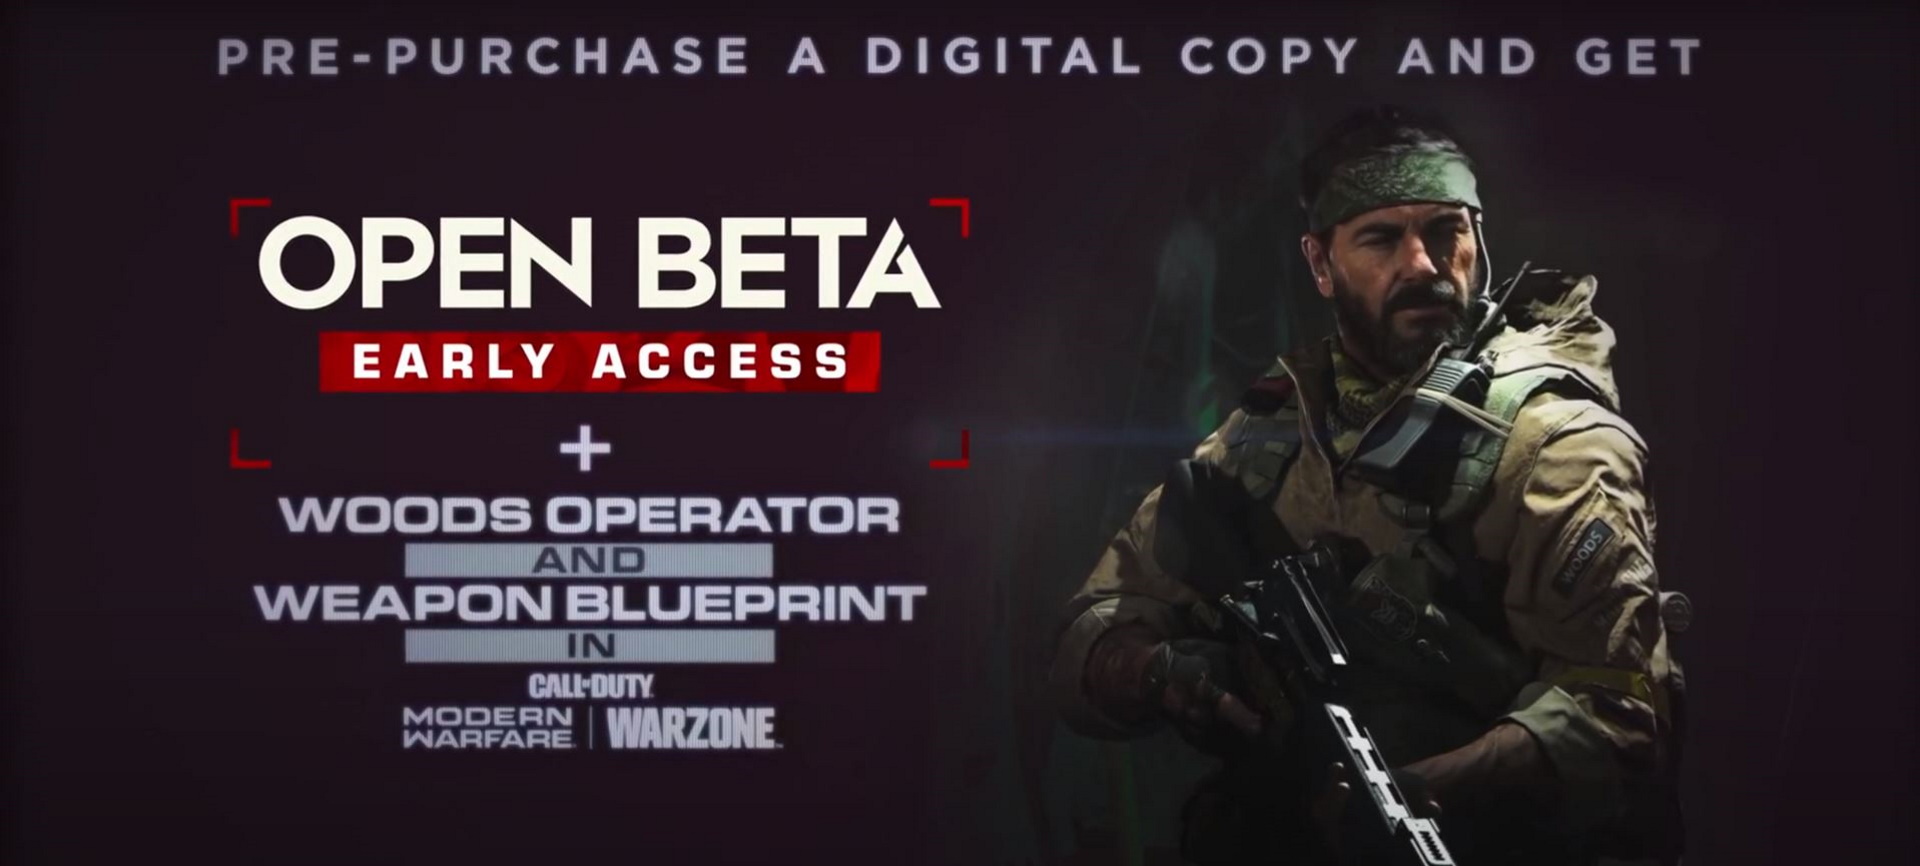 Call-Of-Duty-Black-Ops-Cold-War-release-date-early-access-open-beta-and-more